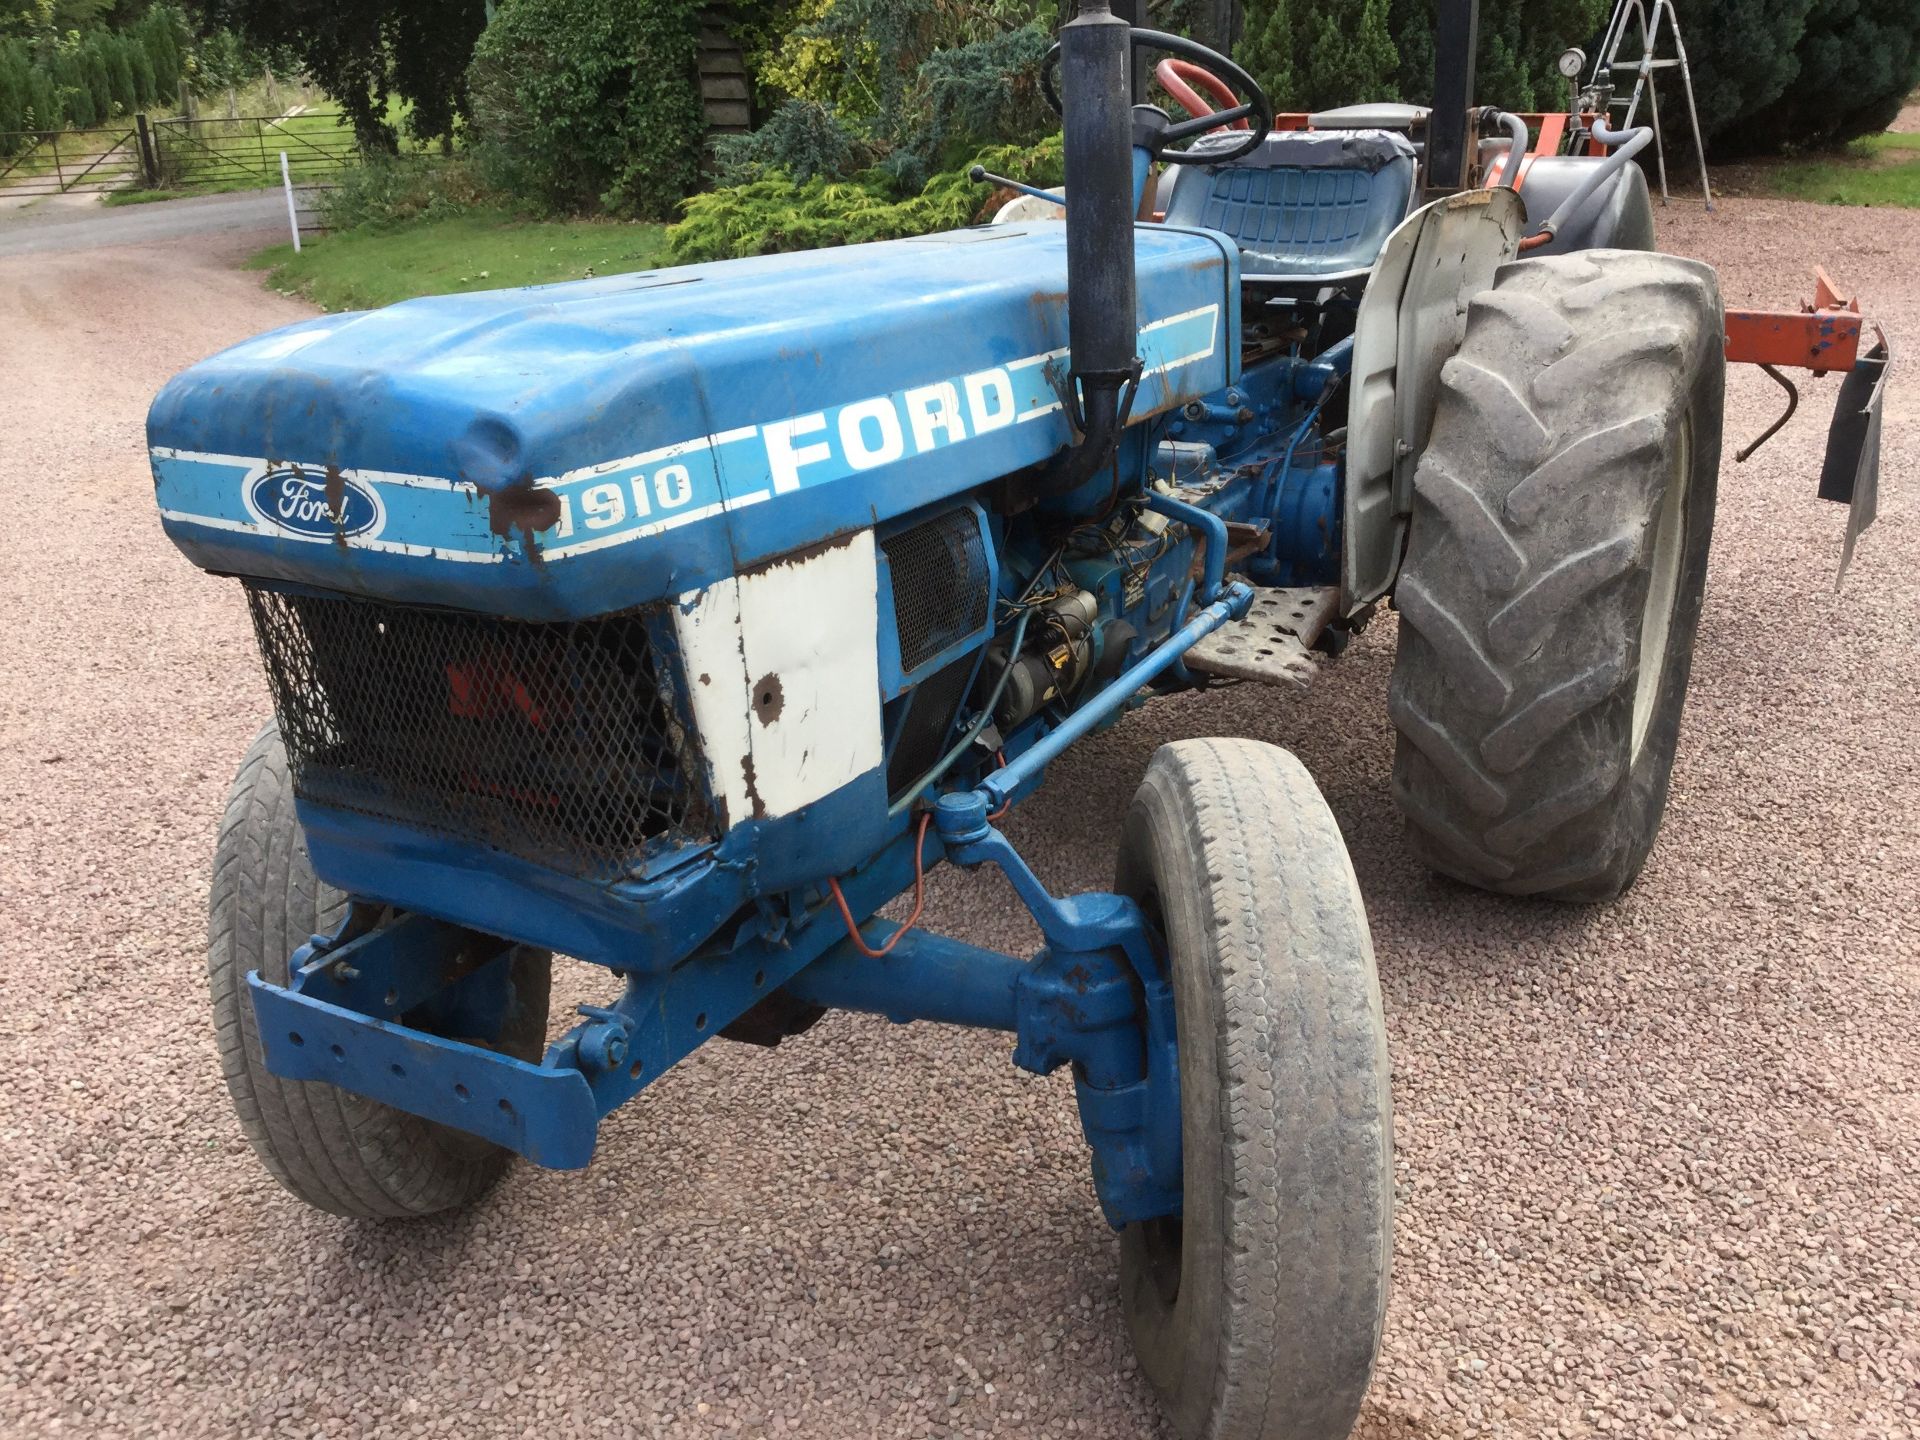 Ford 19 compact tractor - Image 2 of 3